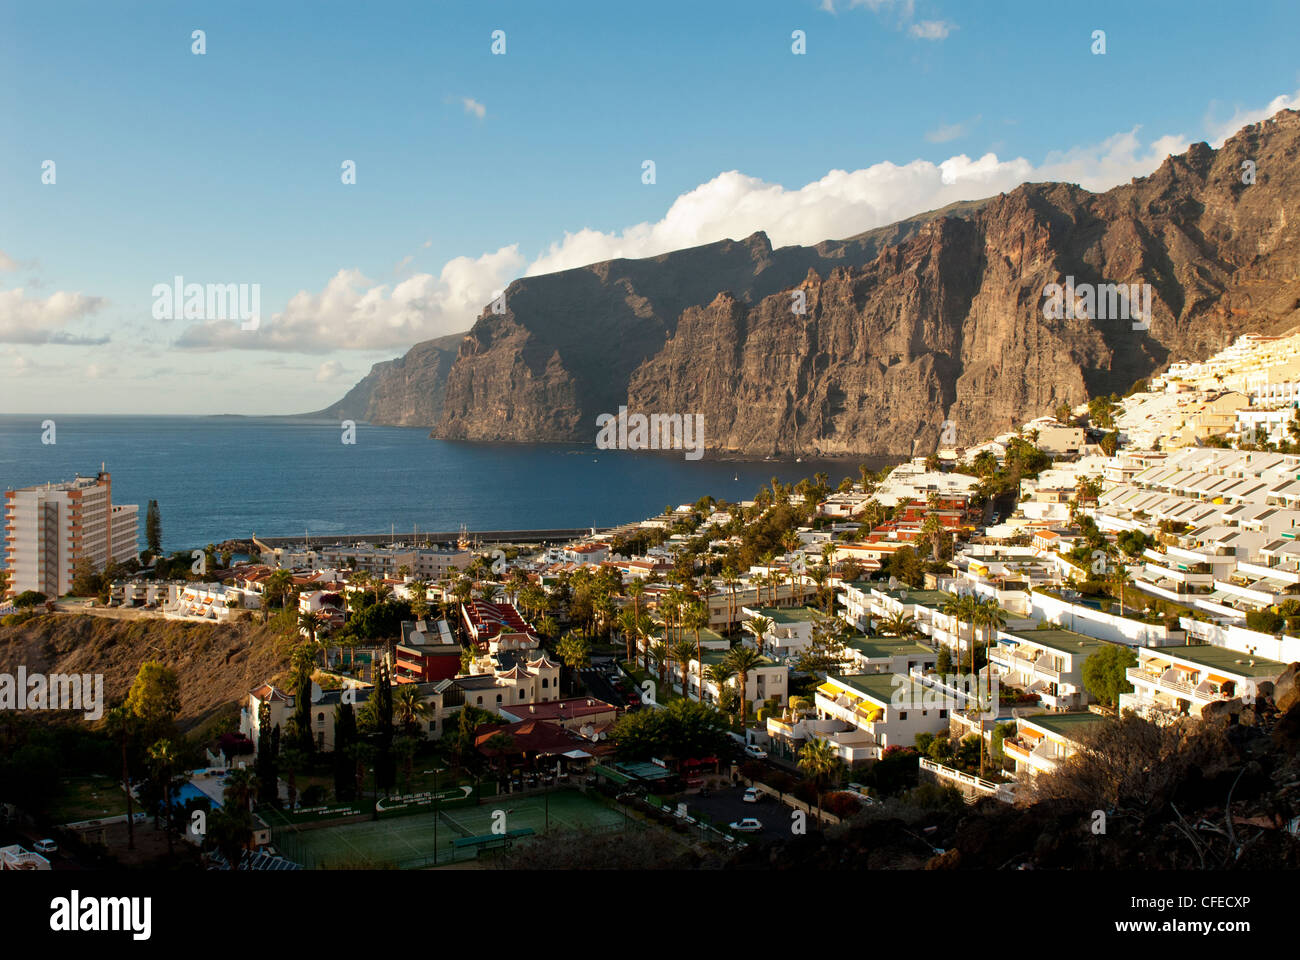 View towards the cliffs and town of Los Gigantes, Tenerife, Canary Islands, Spain. Stock Photo